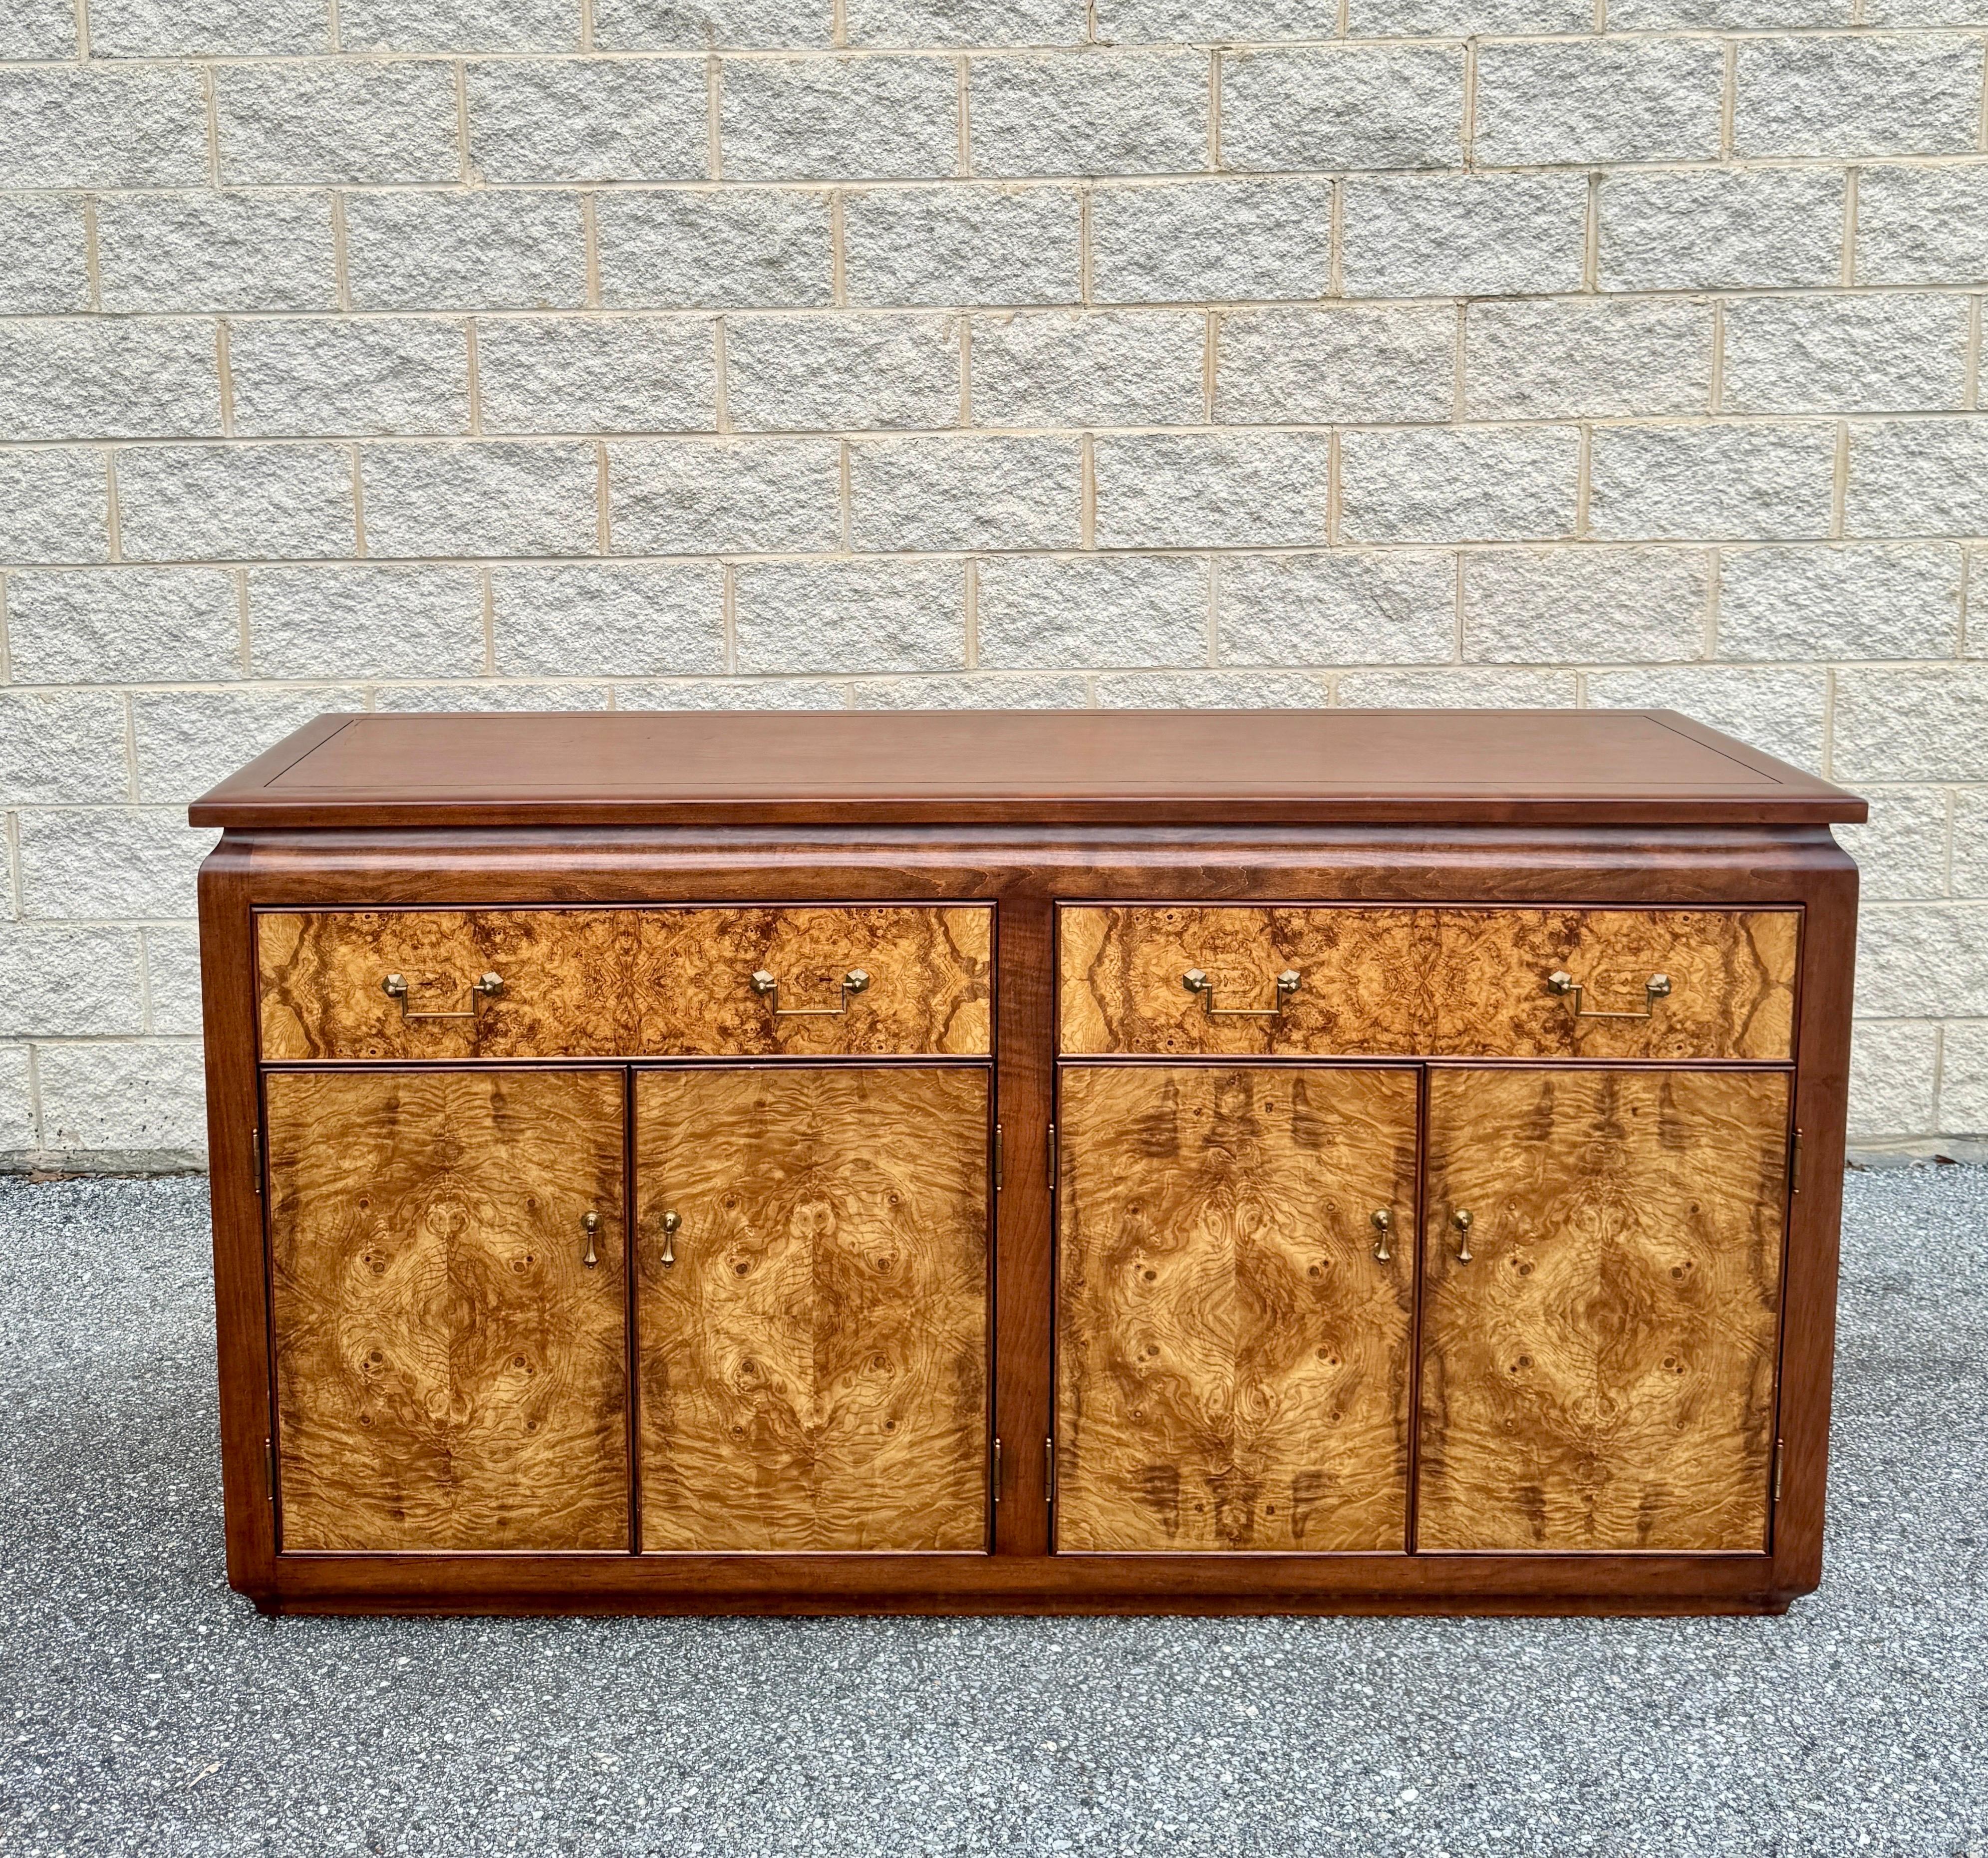 The credenza is meticulously crafted from burl wood and rosewood, adorned with elegant brass handles. It features two generous interior drawers for ample storage, along with two double-door compartments equipped with flexible shelves for versatile